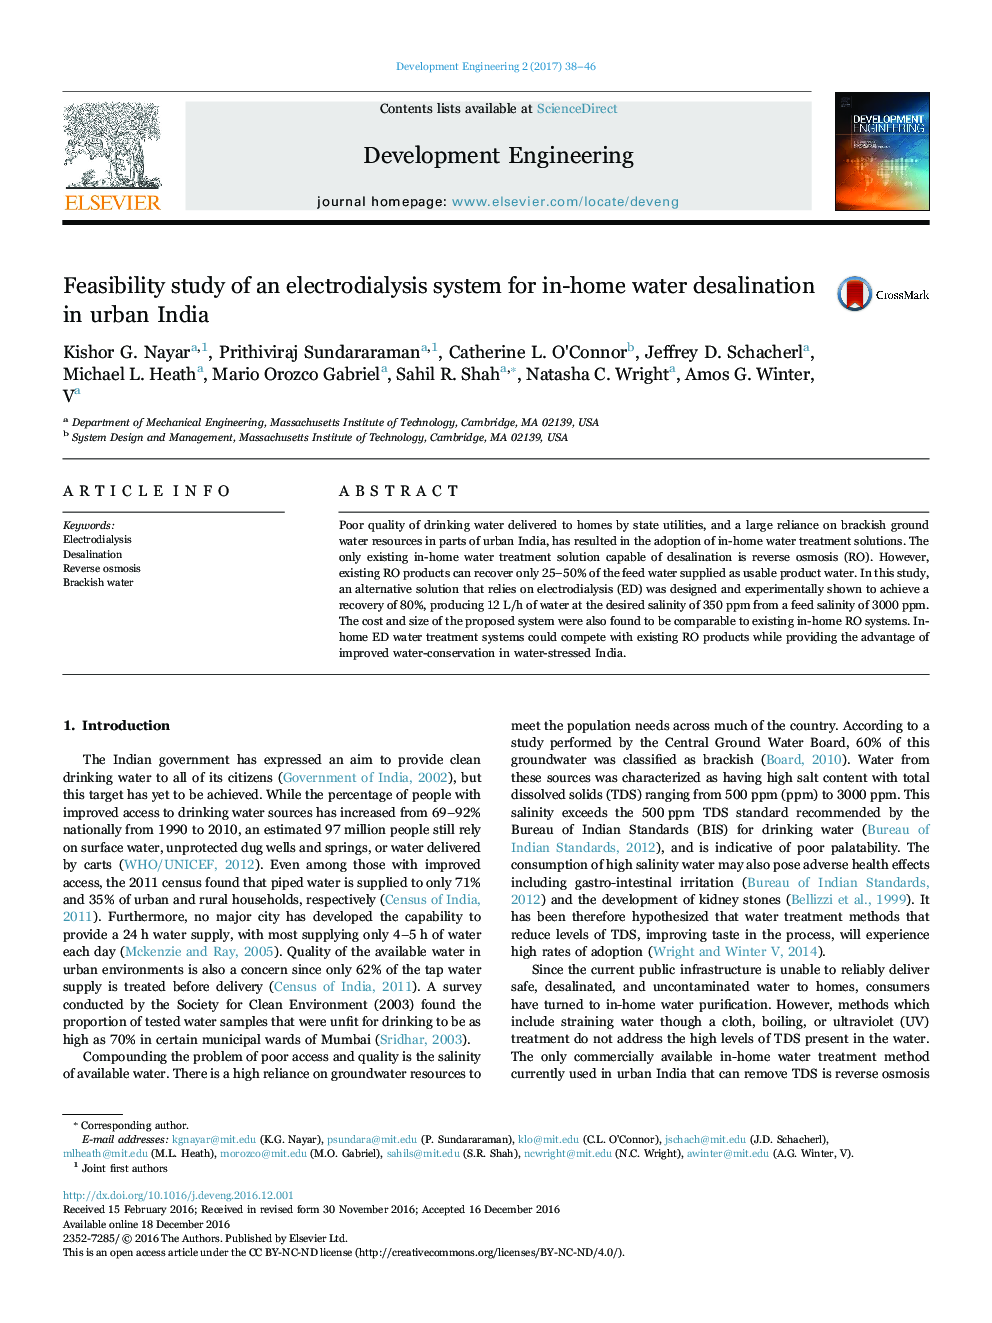 Feasibility study of an electrodialysis system for in-home water desalination in urban India